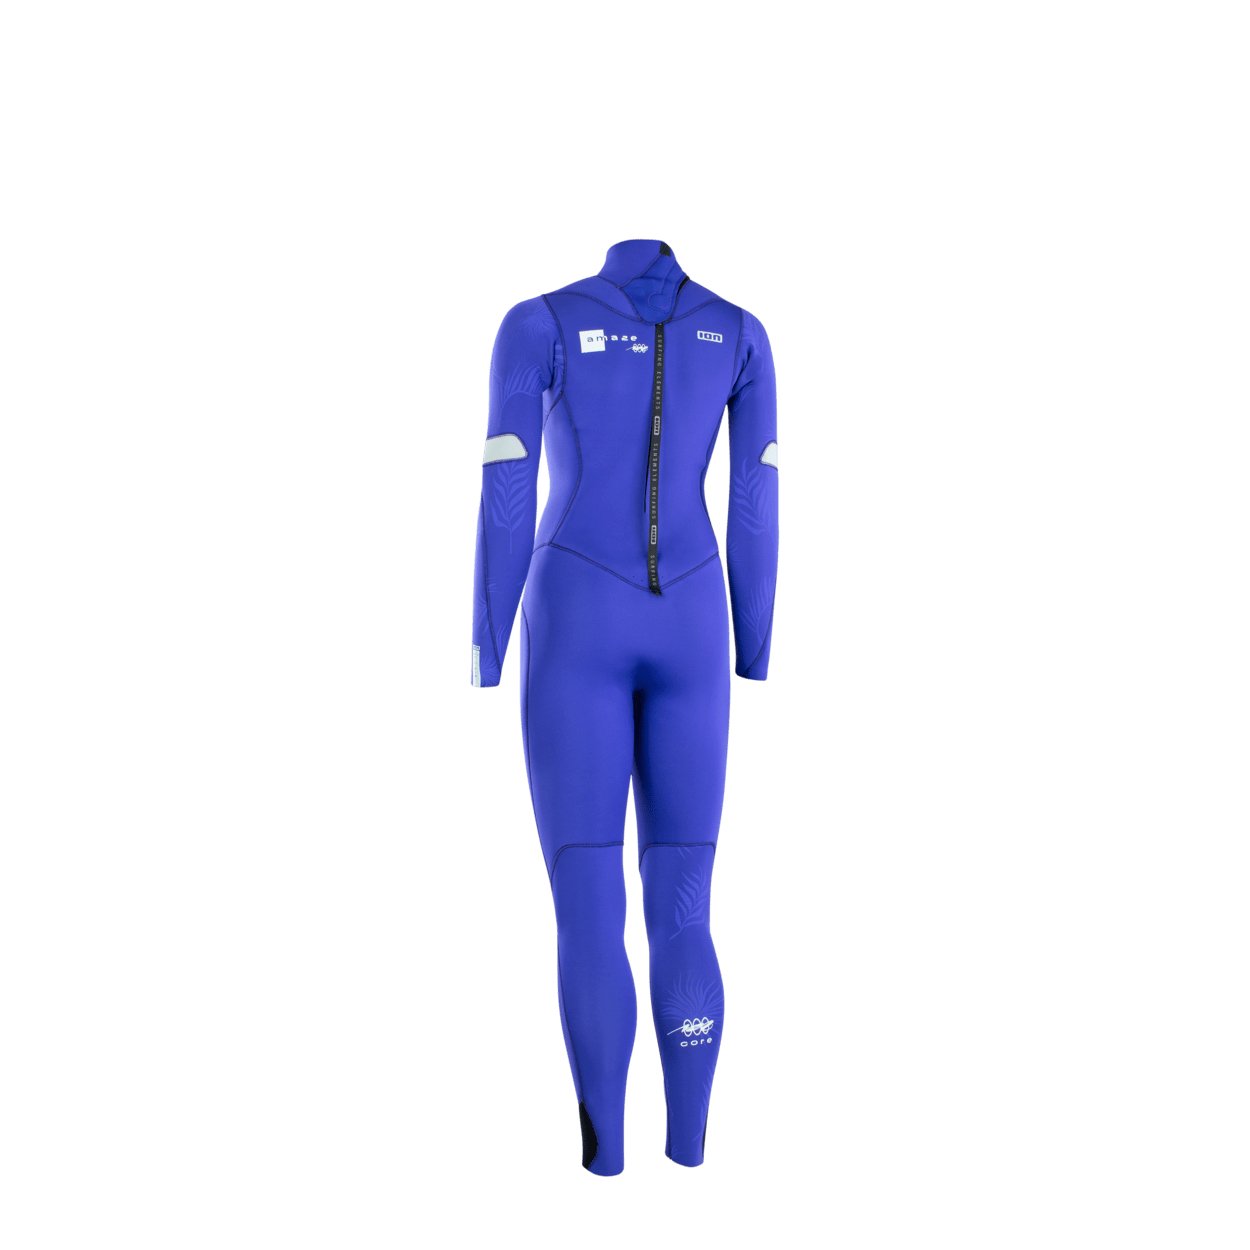 ION Amaze Core 4/3 Back Zip 2022 - Worthing Watersports - 9010583057705 - Wetsuits - ION Water